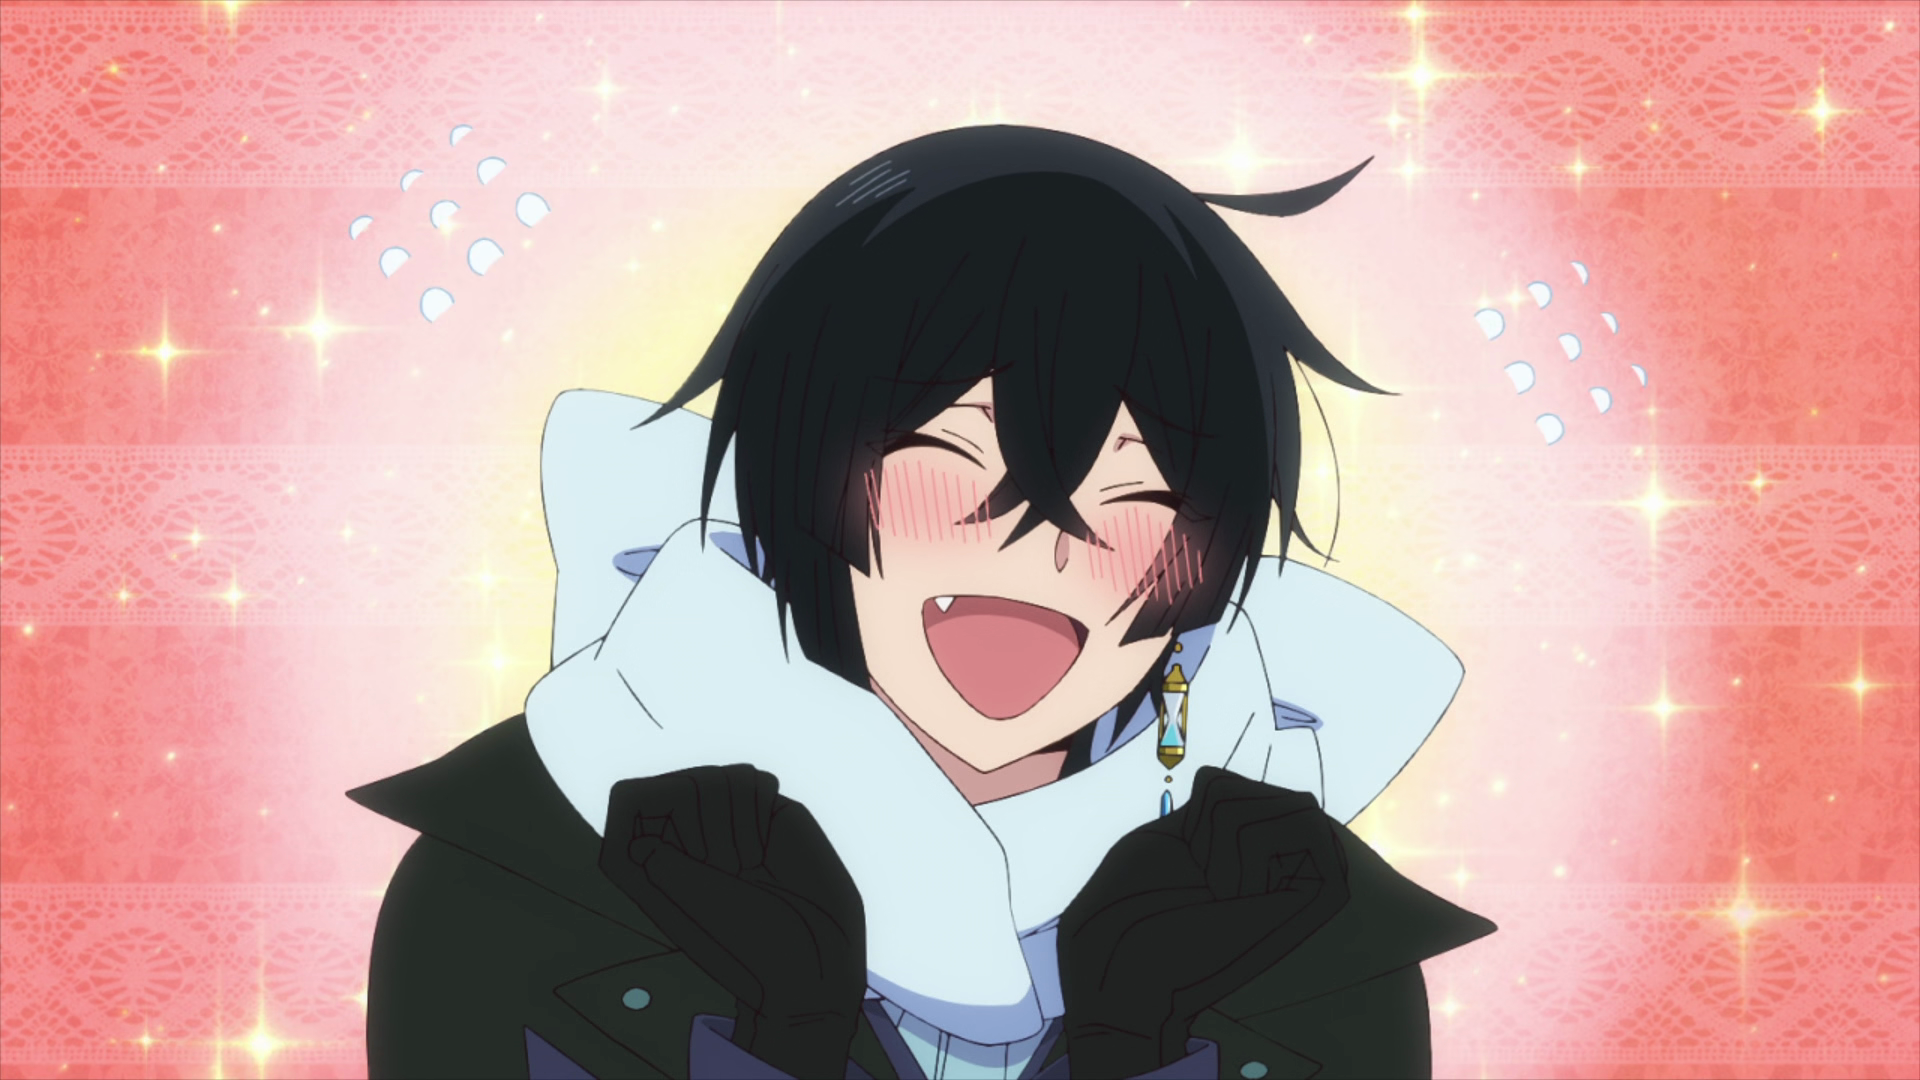 The Case Study of Vanitas TV Anime Previews Second Half in Snow